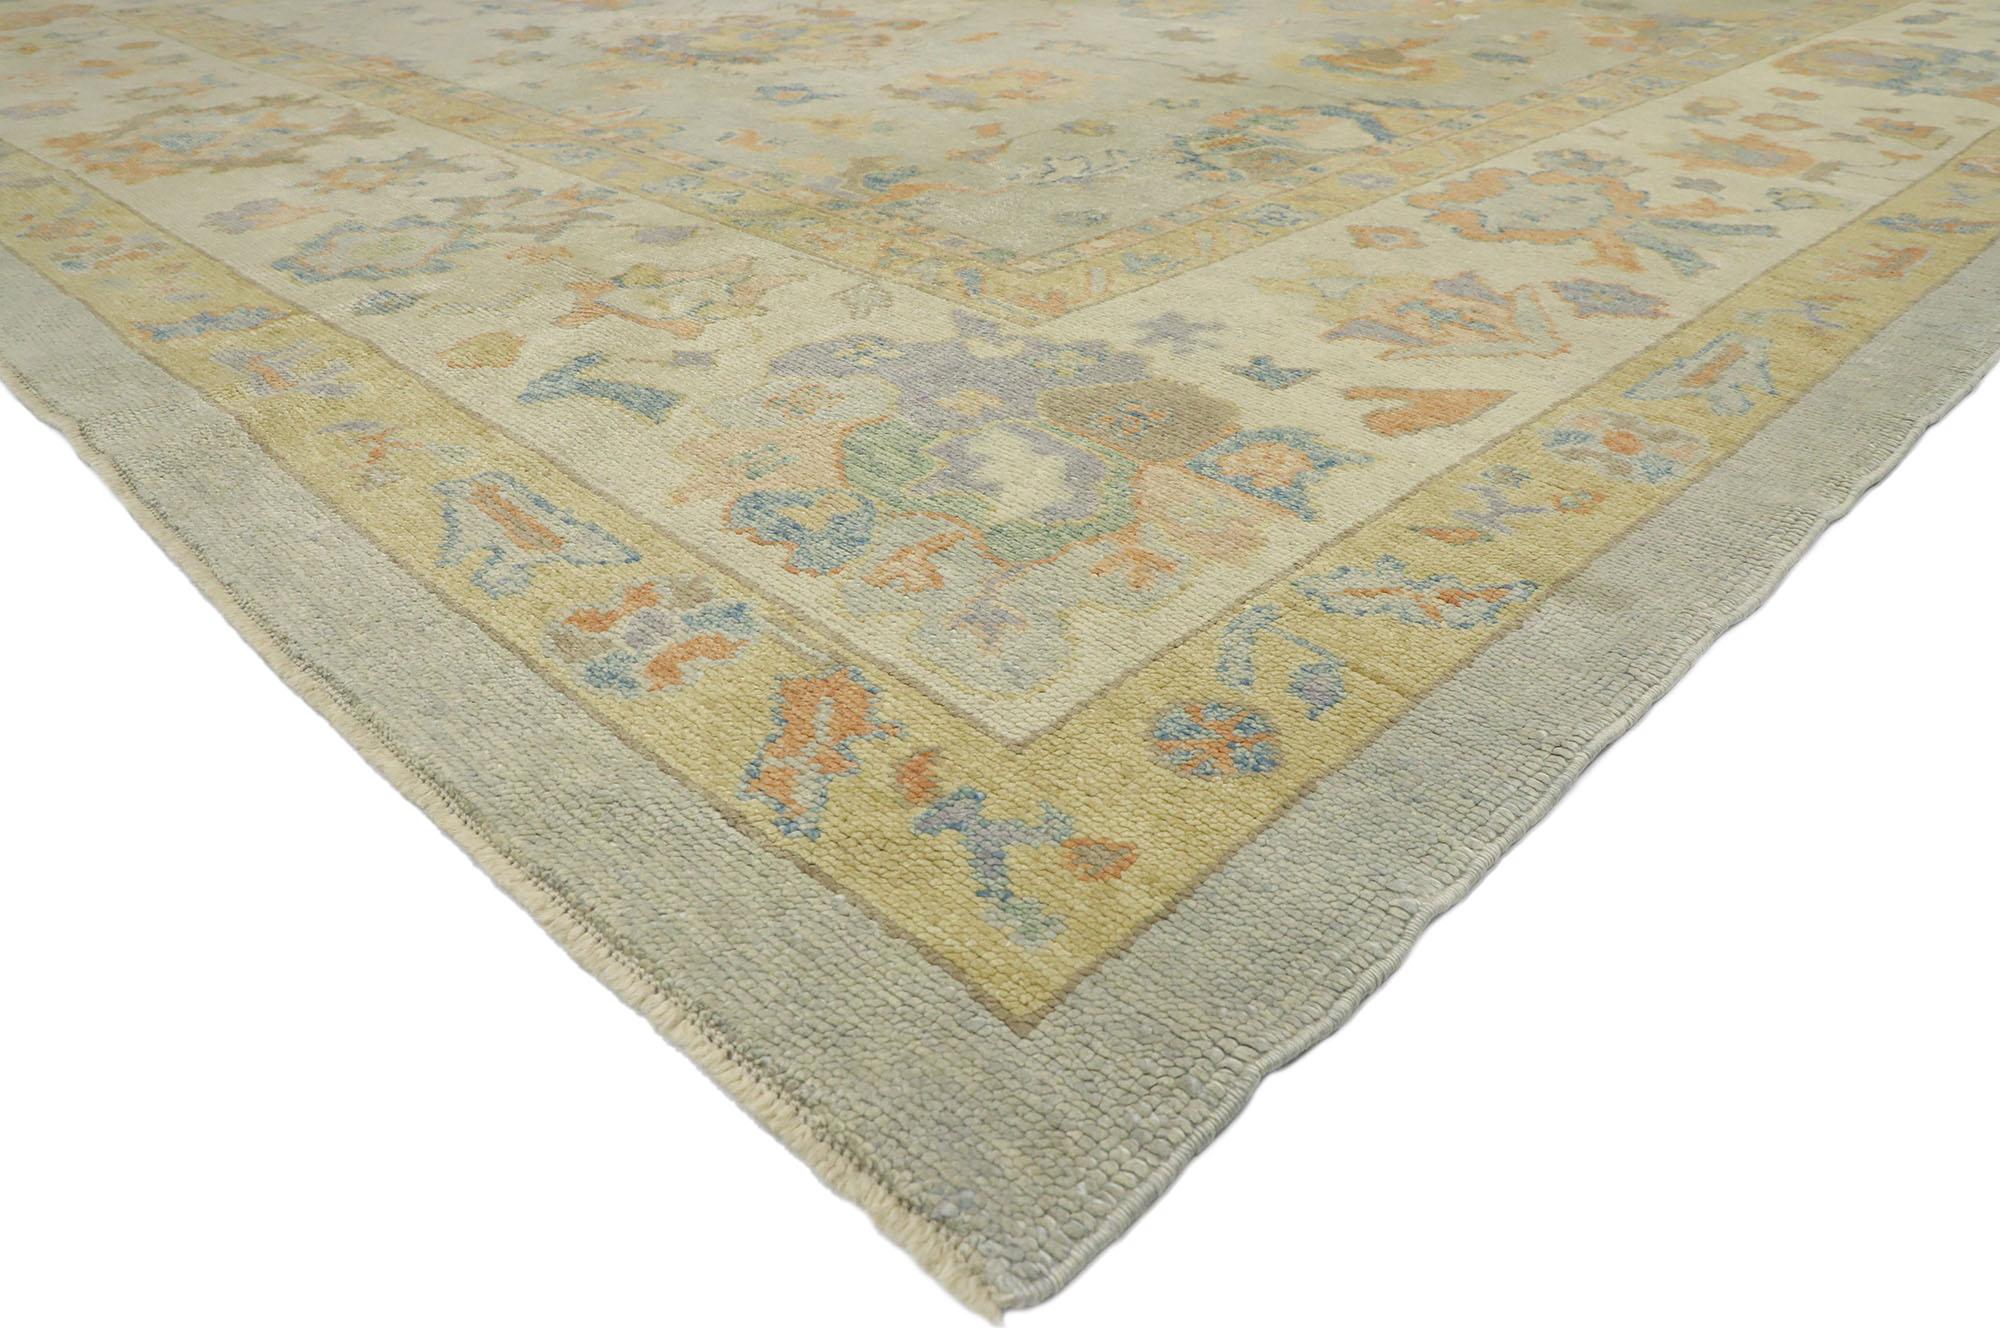 52733, new contemporary Turkish Oushak rug with Transitional style 12'03 x 15'10. Blending elements from the modern world with light and airy colors, this hand knotted wool contemporary Turkish Oushak style area rug will boost the coziness factor in